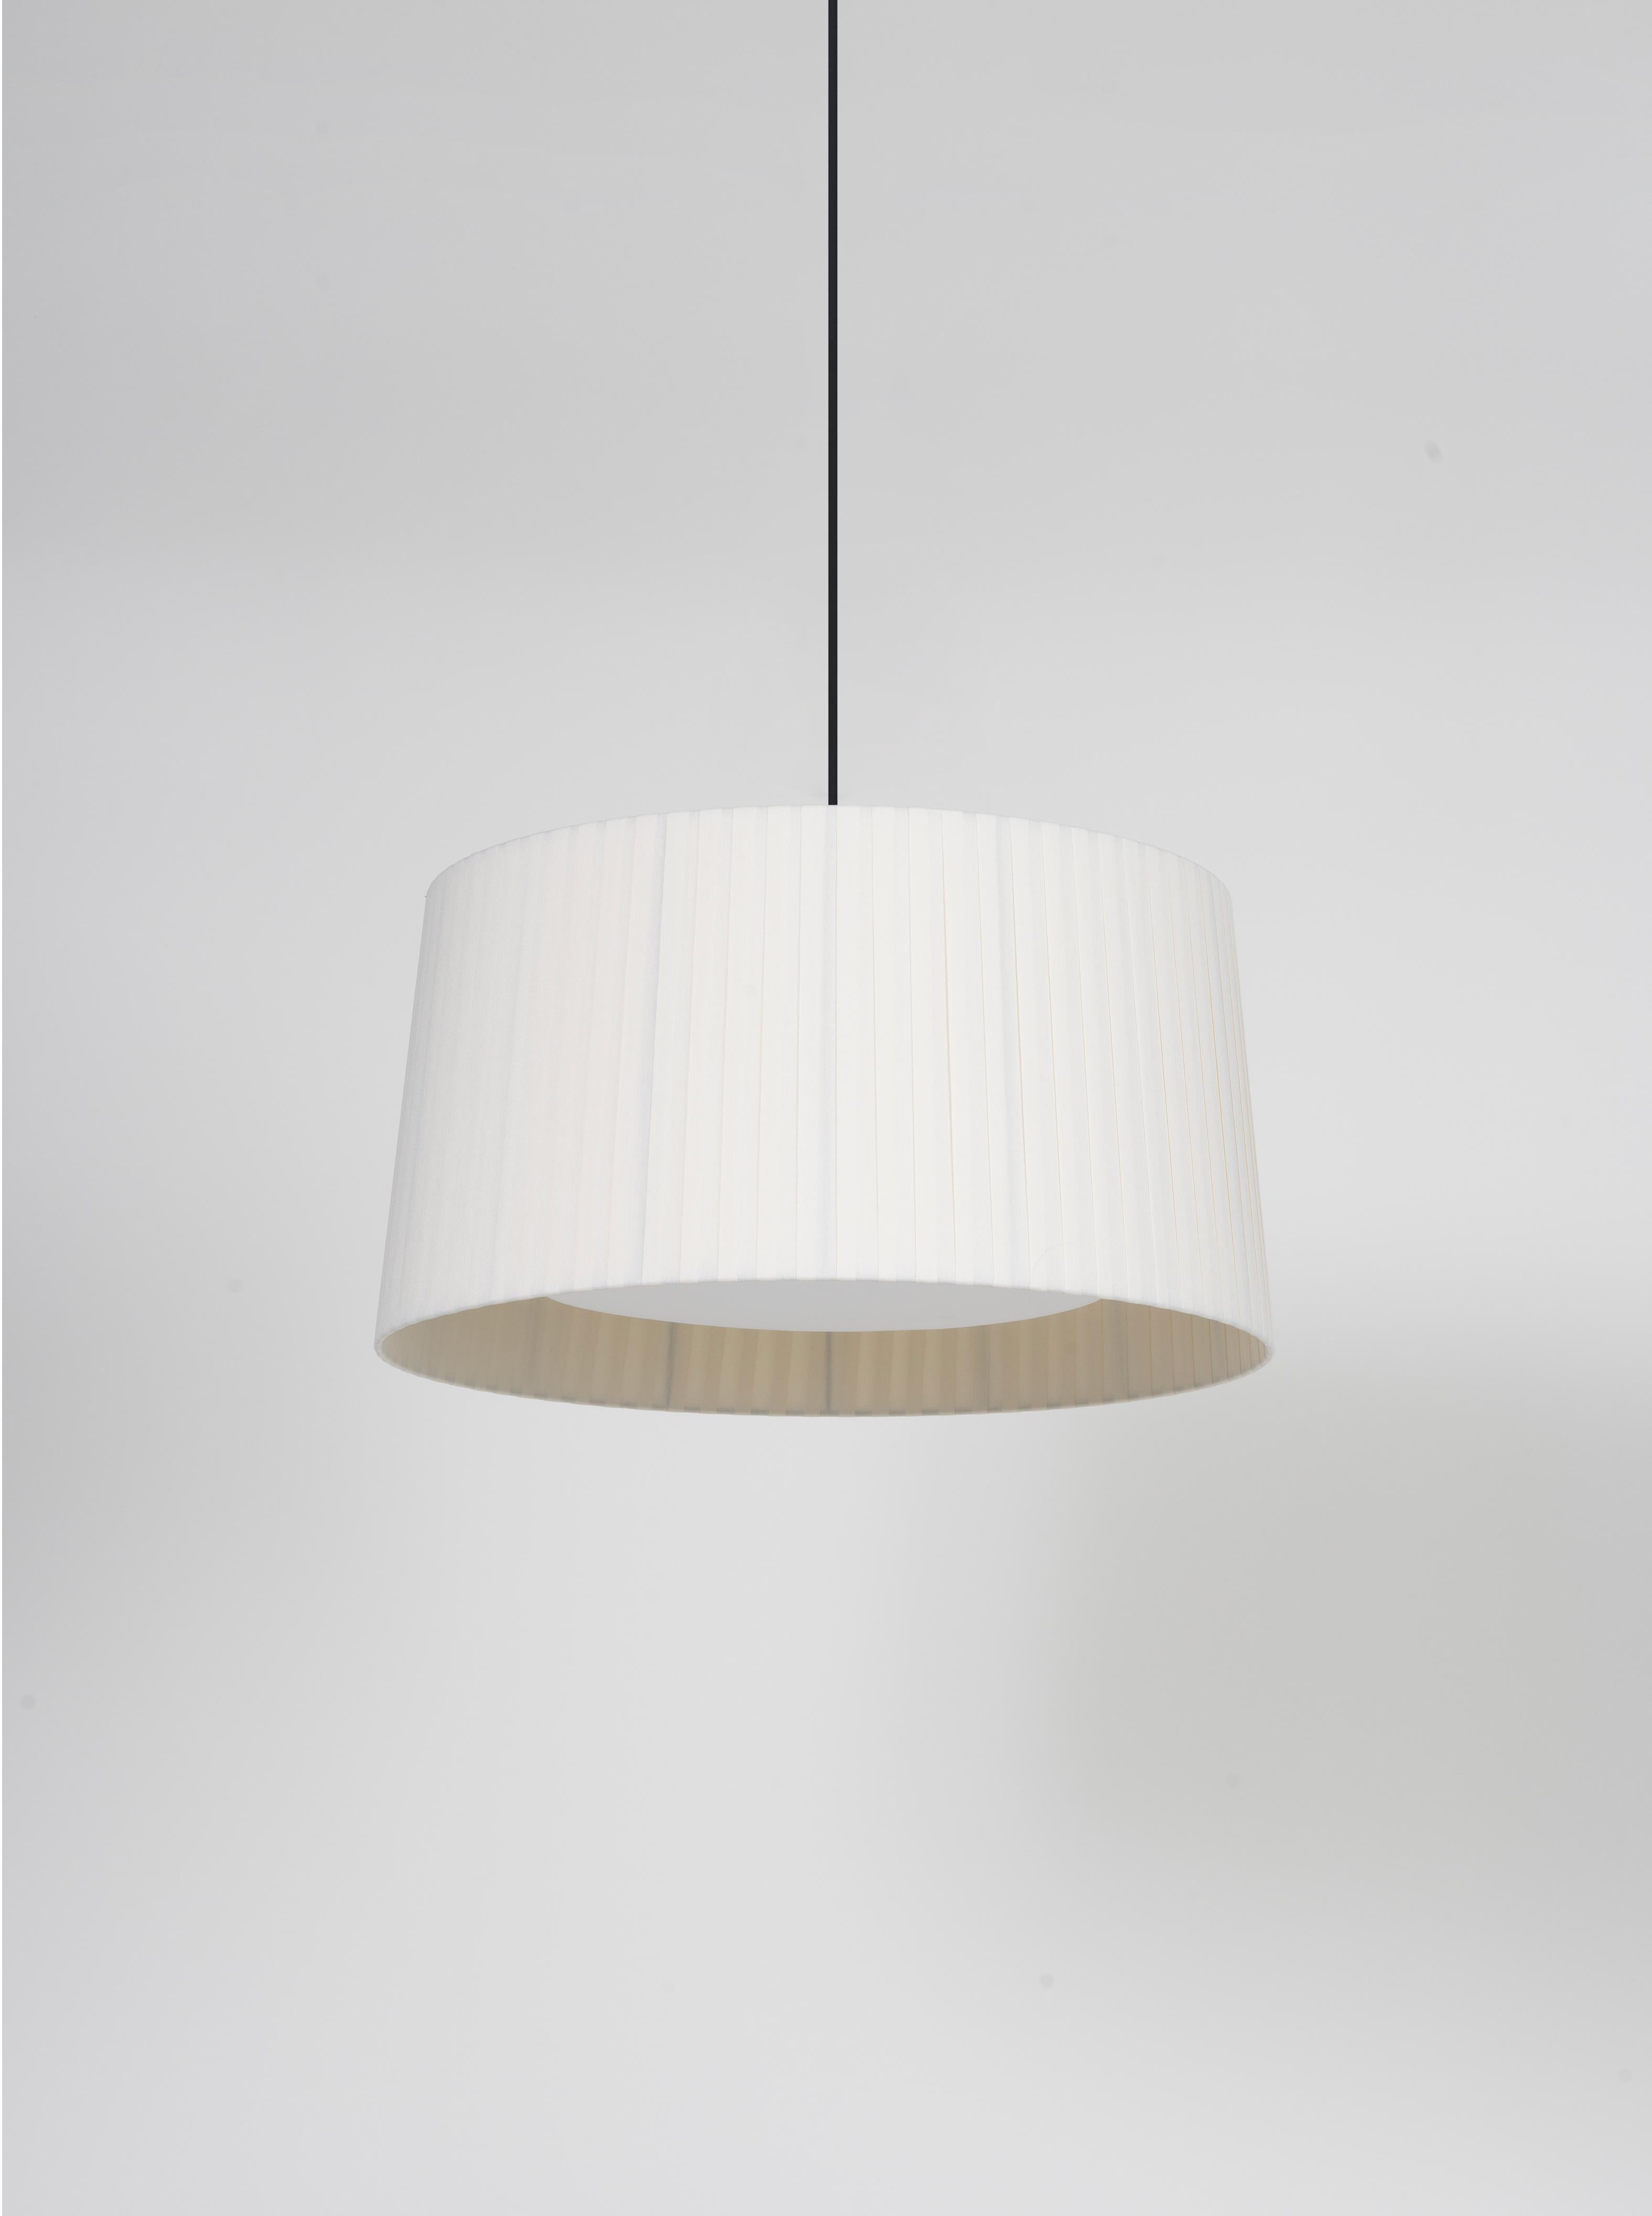 Natural GT5 pendant lamp by Santa & Cole
Dimensions: D 62 x H 32 cm
Materials: Metal, ribbon.
Available in other colors. Available in 2 lights version.

Designed for intermediate volumes and household areas, GT5 and GT6 are hanging lamps with